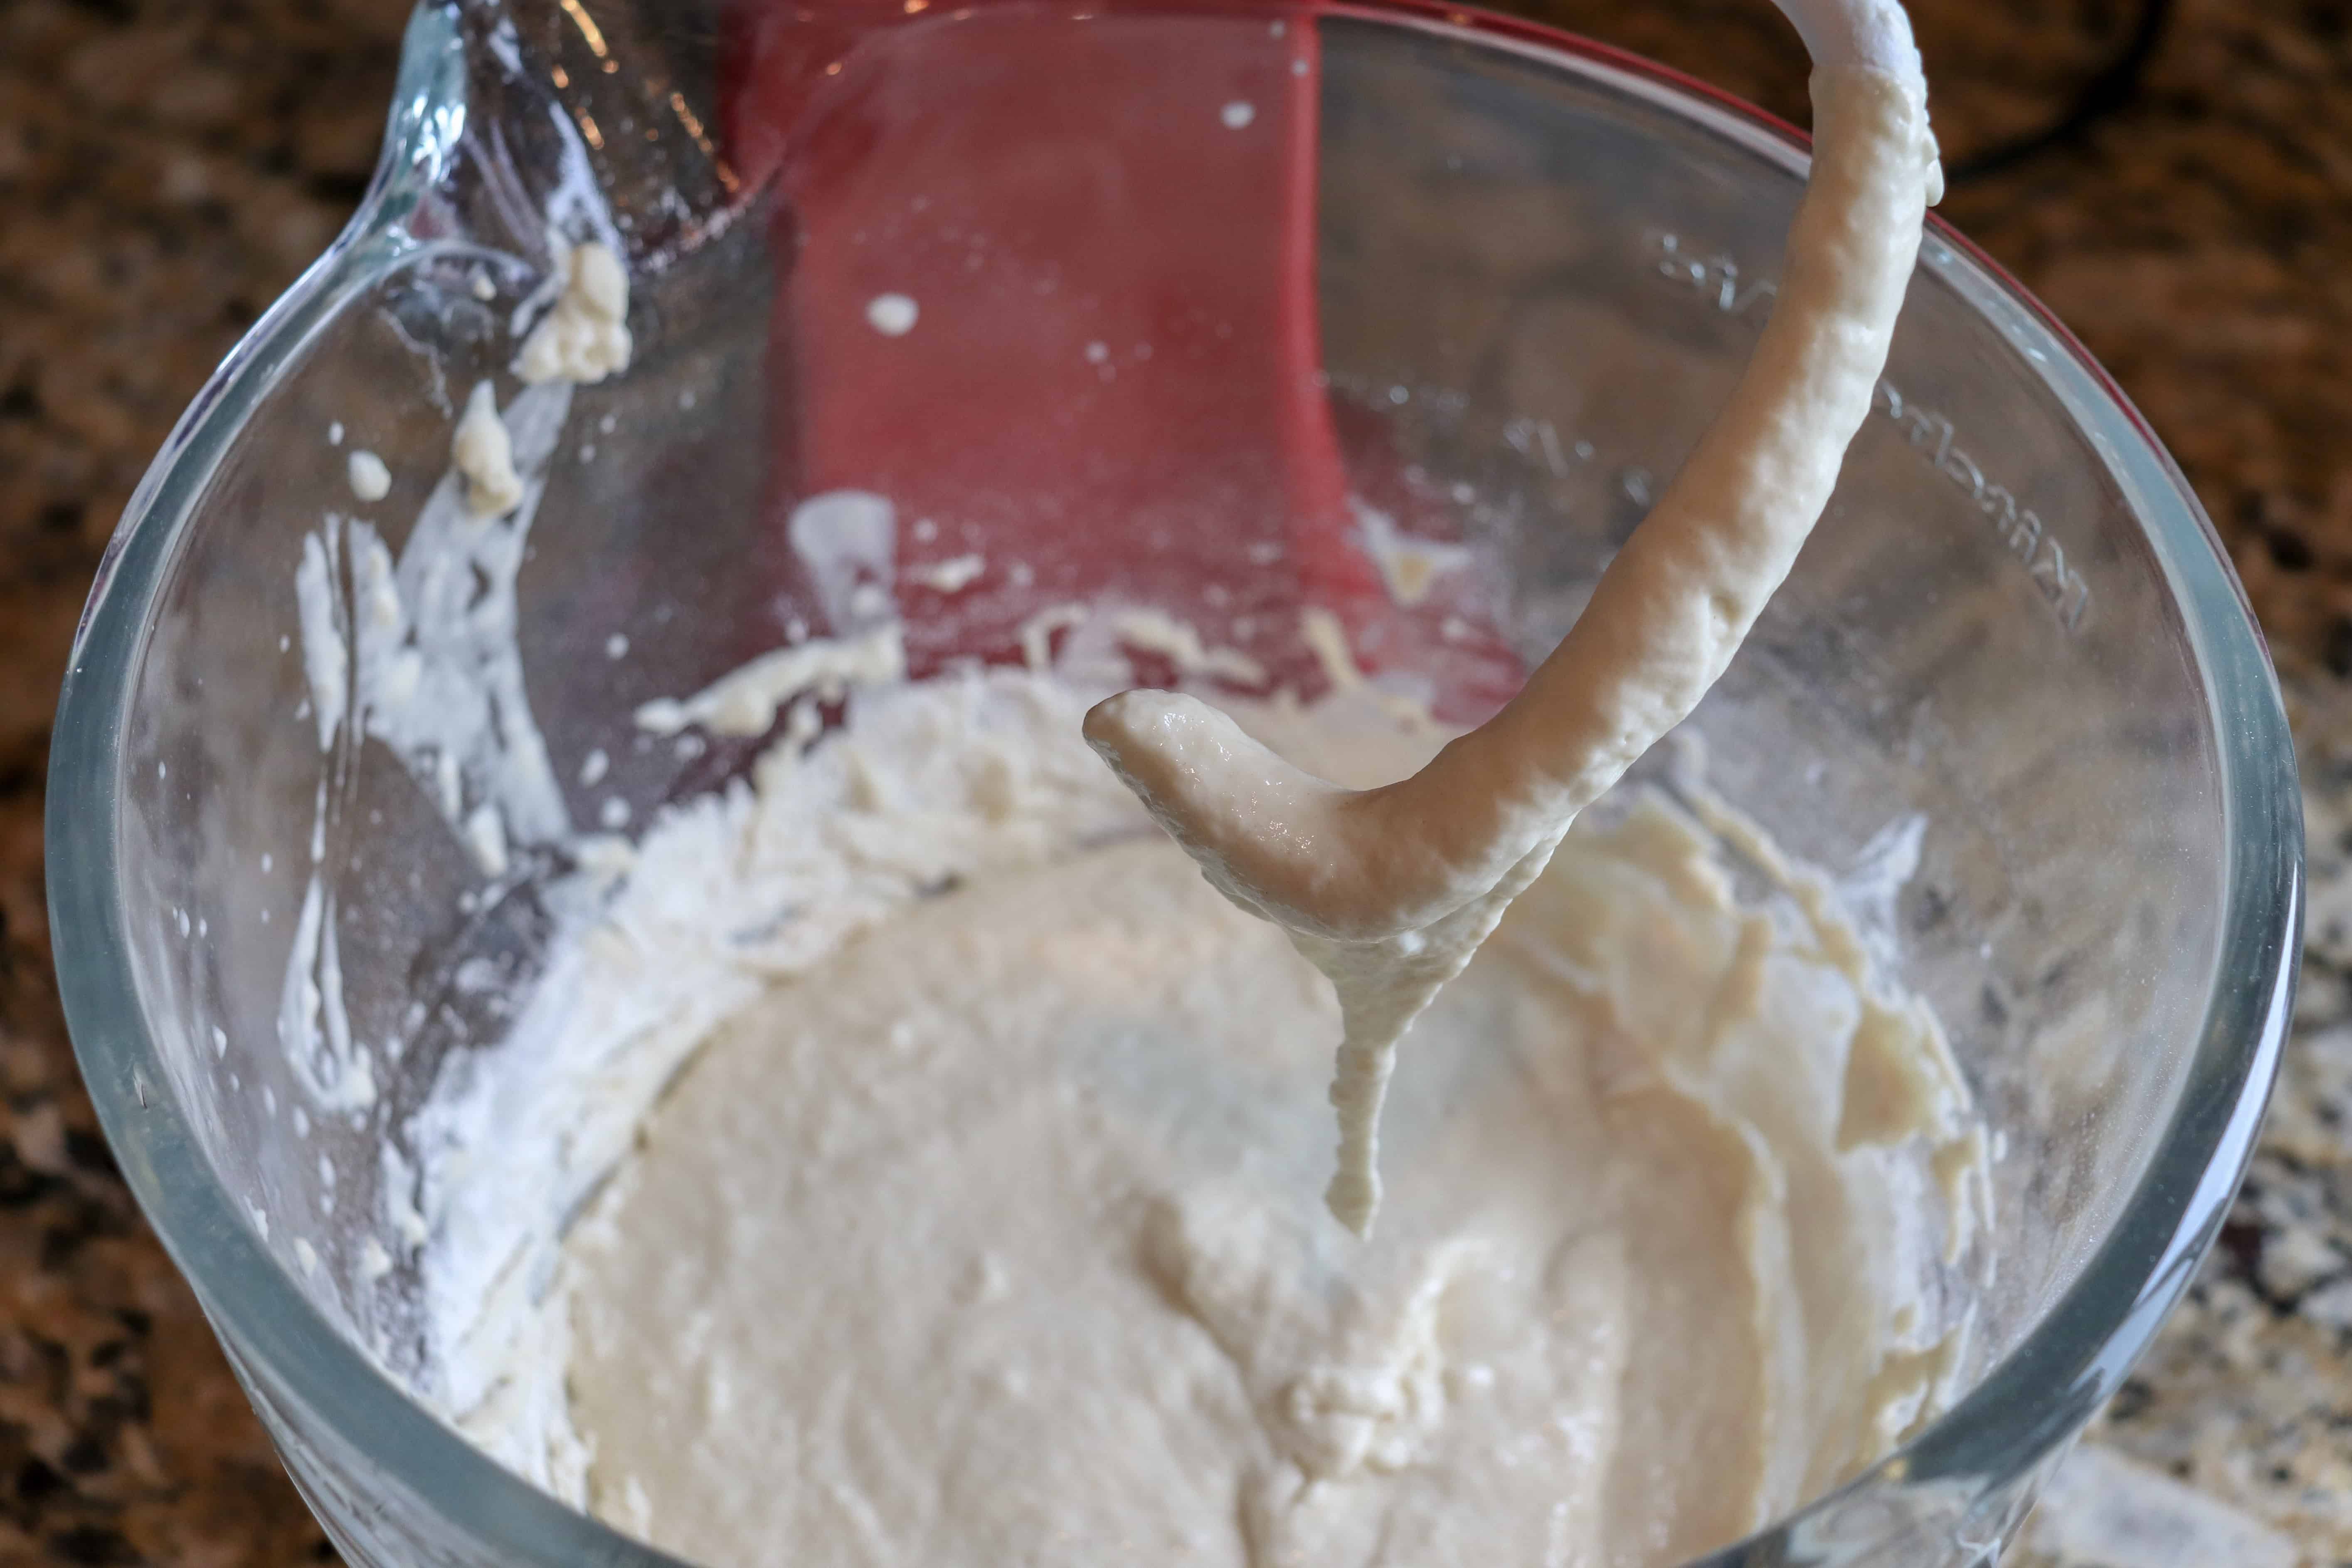 a sticky dough in mixer (pic. 2)